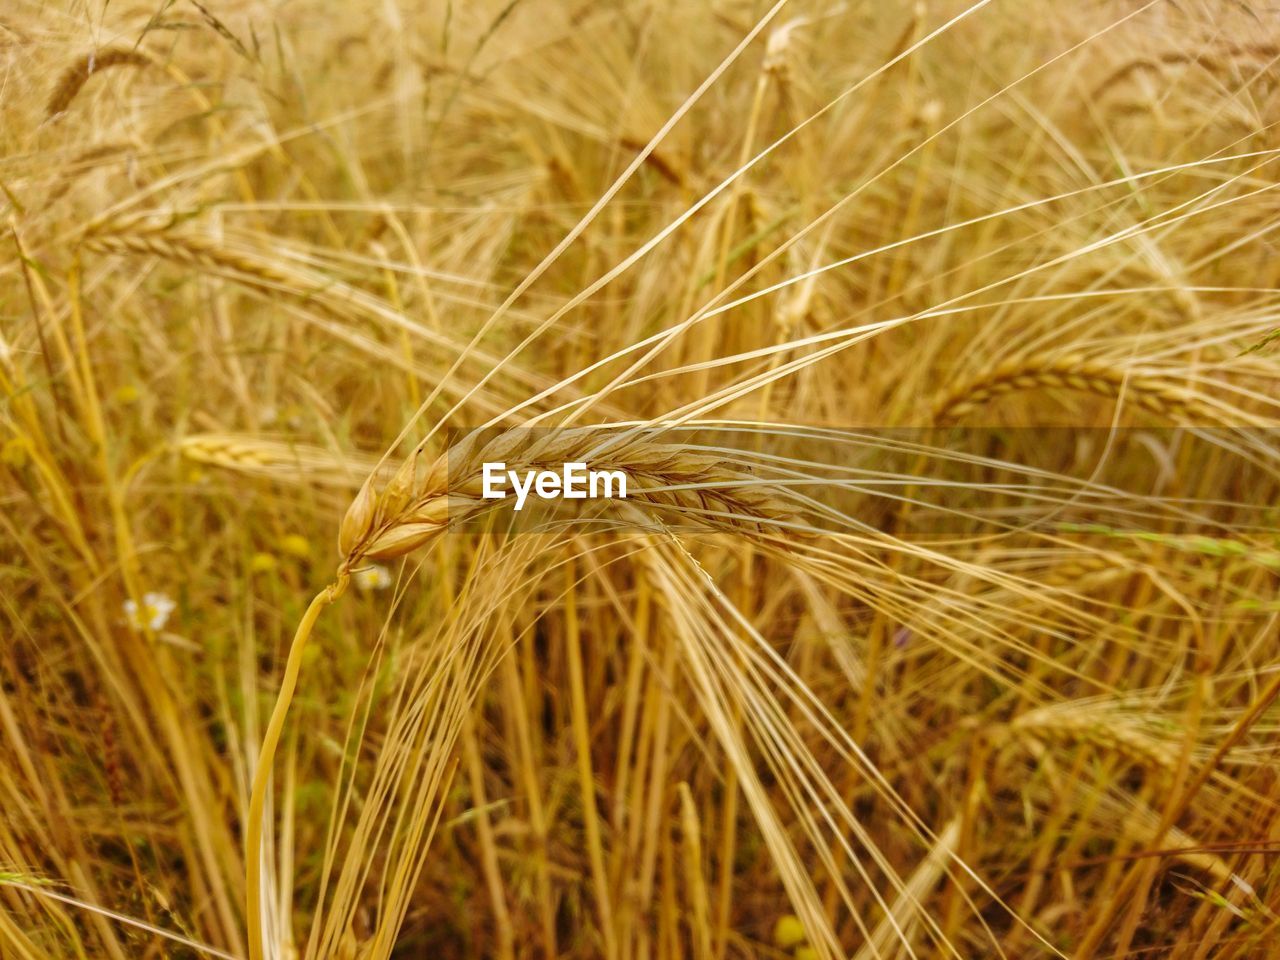 CLOSE-UP OF WHEAT PLANTS ON FIELD